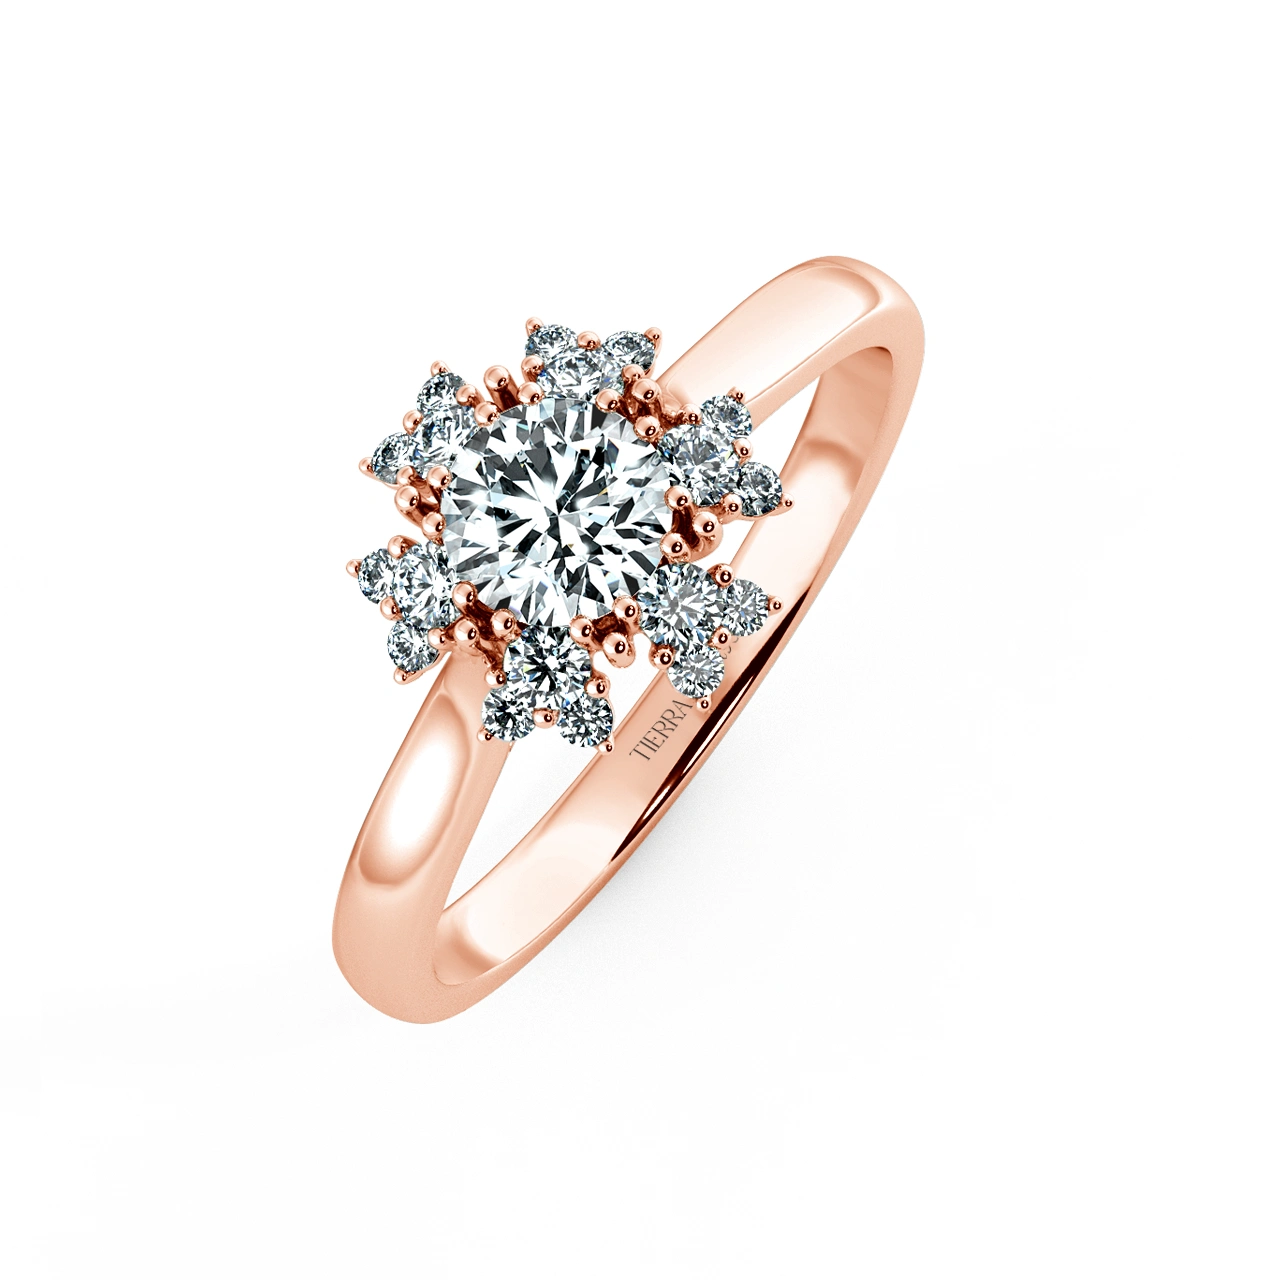 Apricot Blossom Halo engagement Ring with shiny Band NCH2002 3